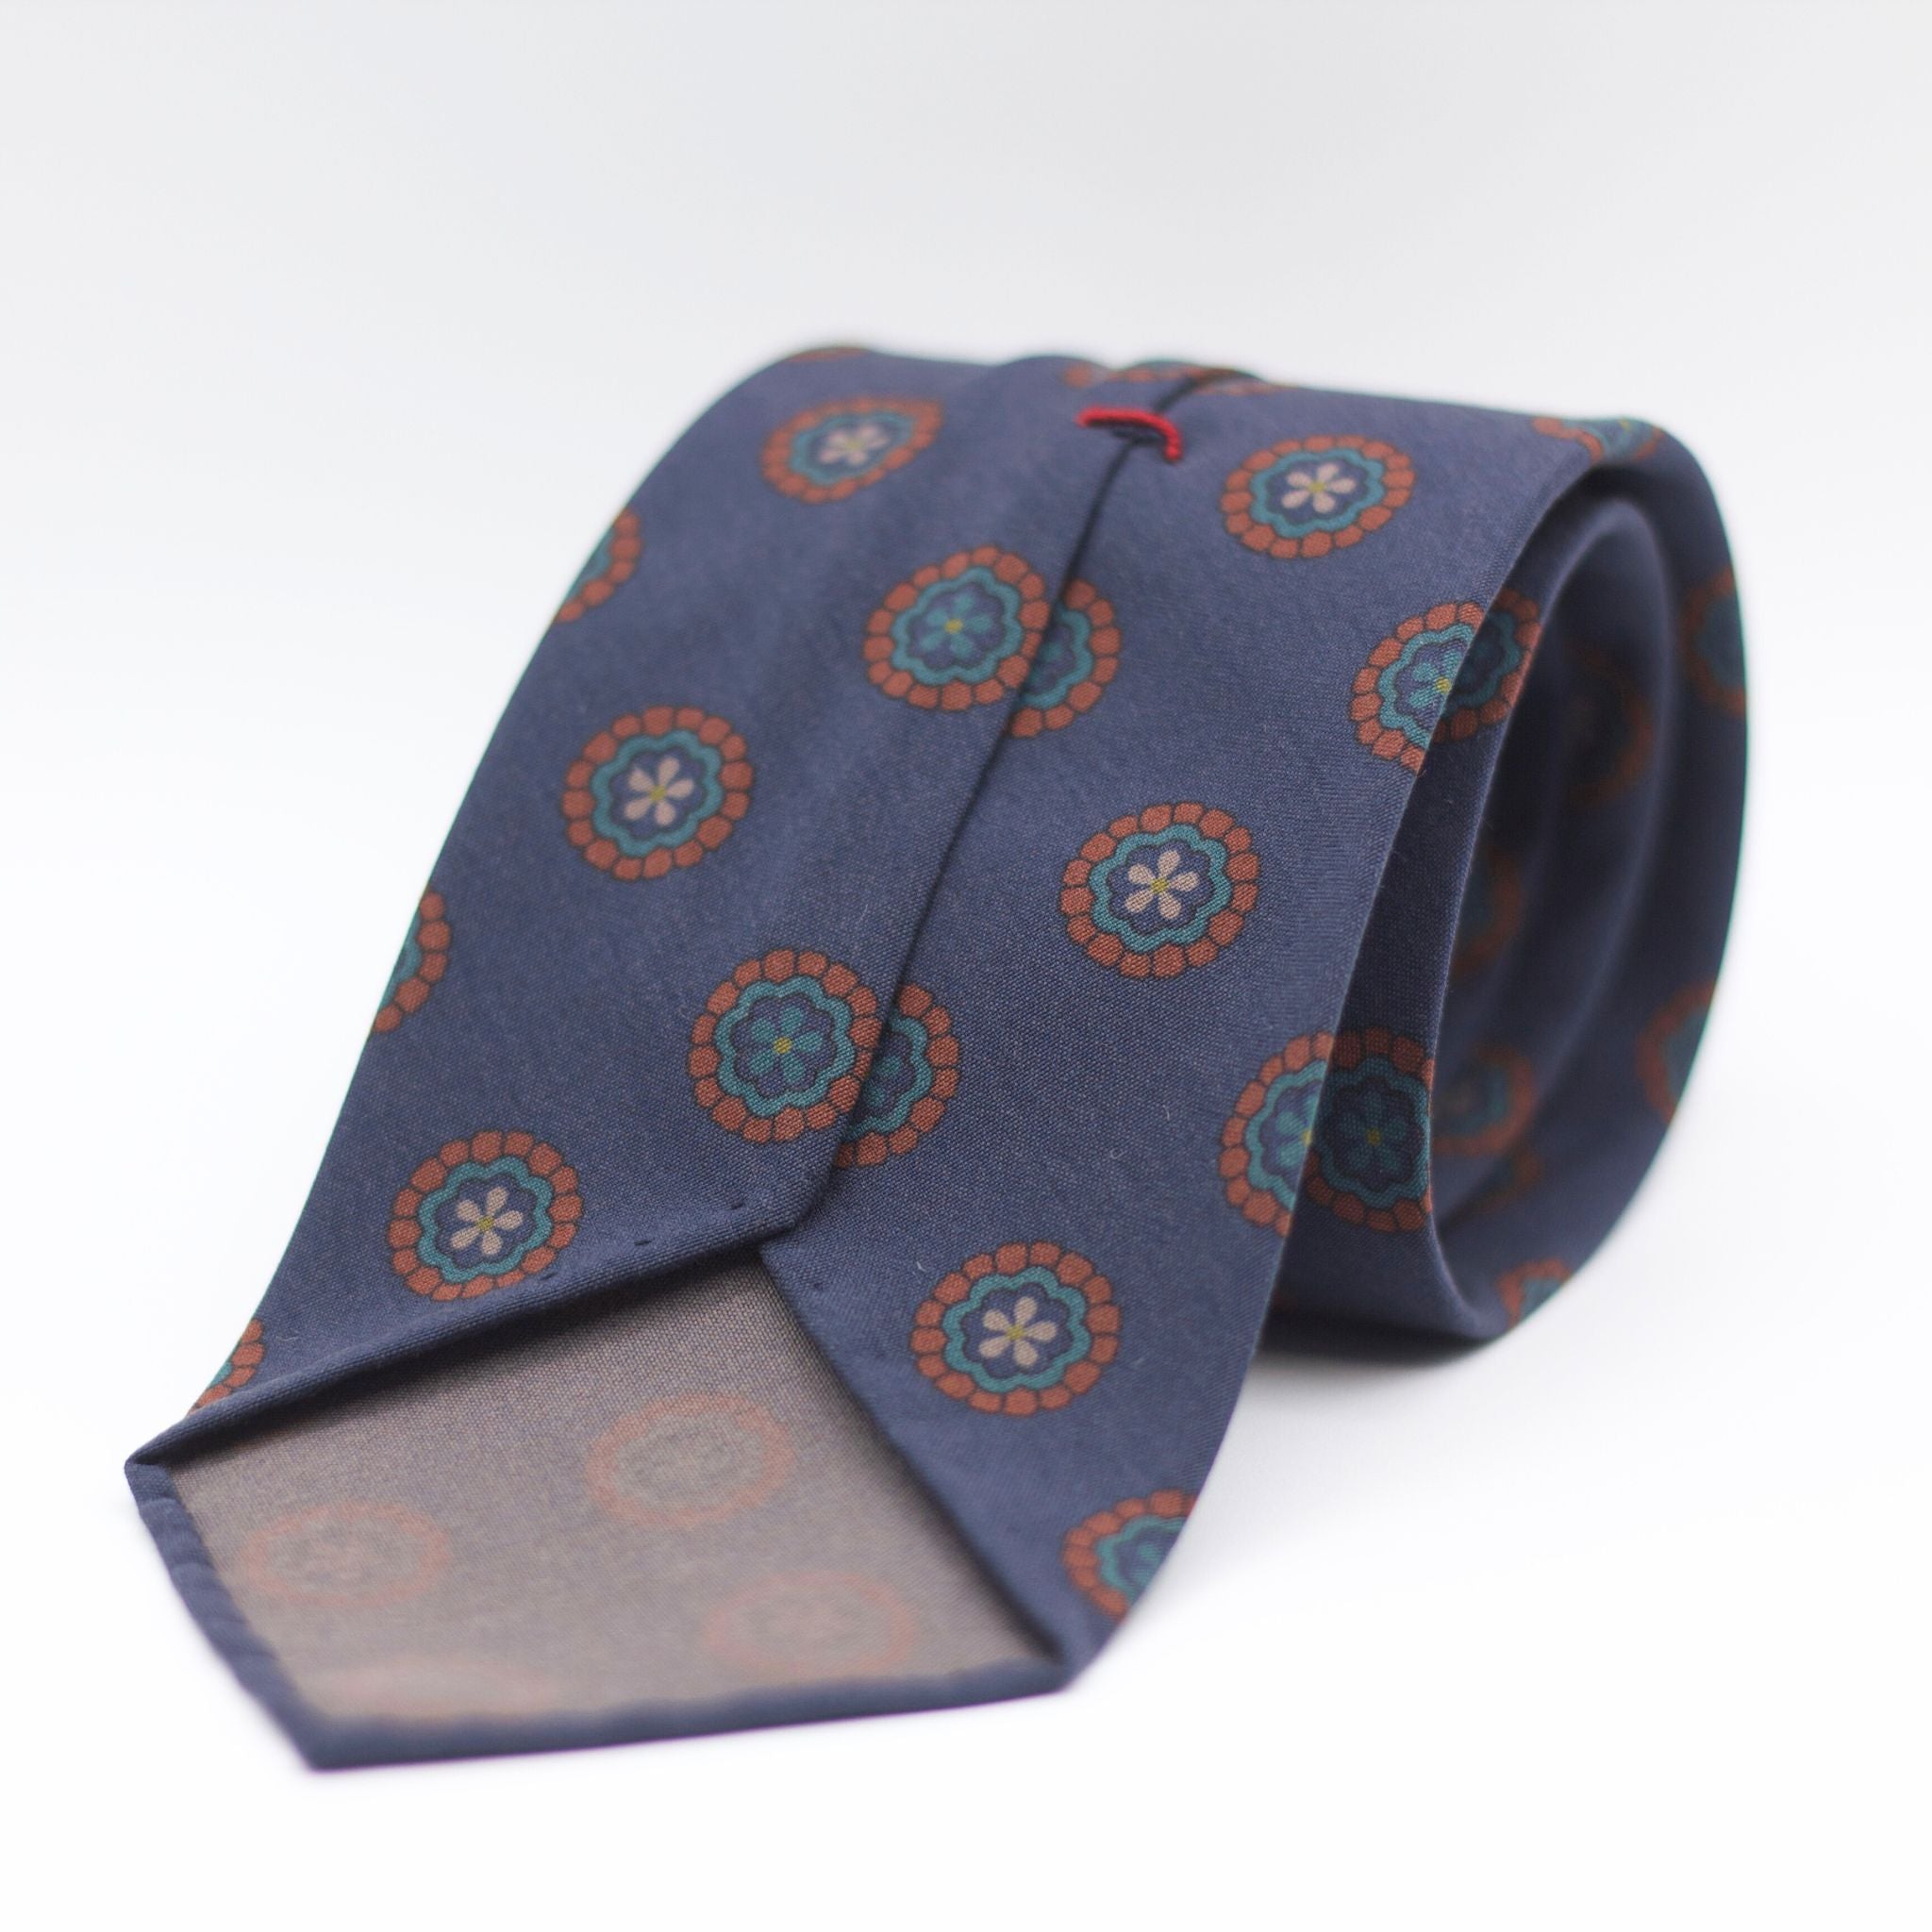 Cruciani & Bella 100% Printed Madder Silk  Italian fabric Unlined tie Blue, Light Blue and Brown Motif Unlined Tie Handmade in Italy 8 cm x 150 cm